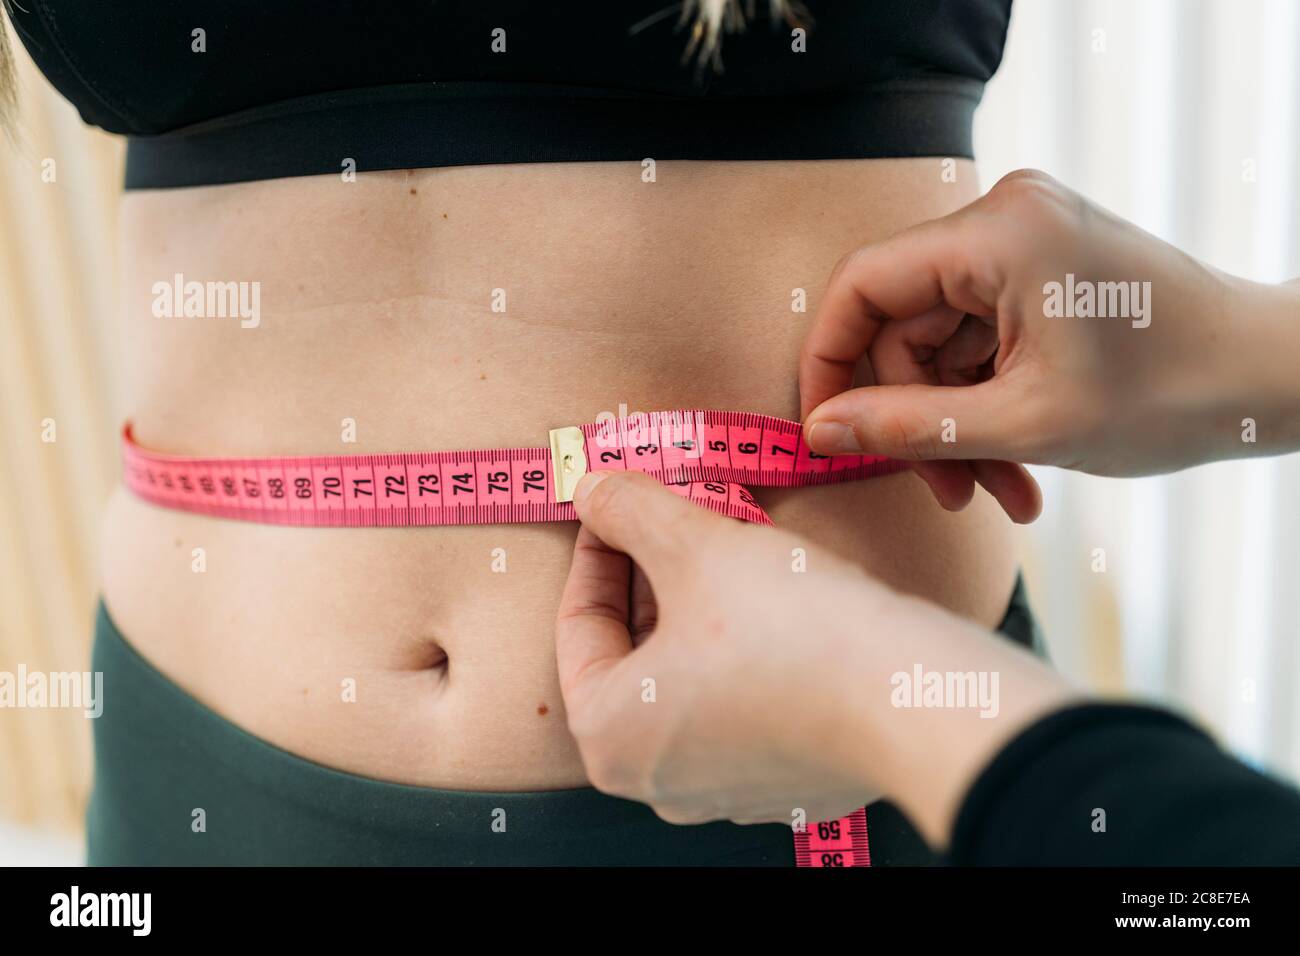 Woman measuring her waist size with a tape measure - StockFreedom - Premium  Stock Photography